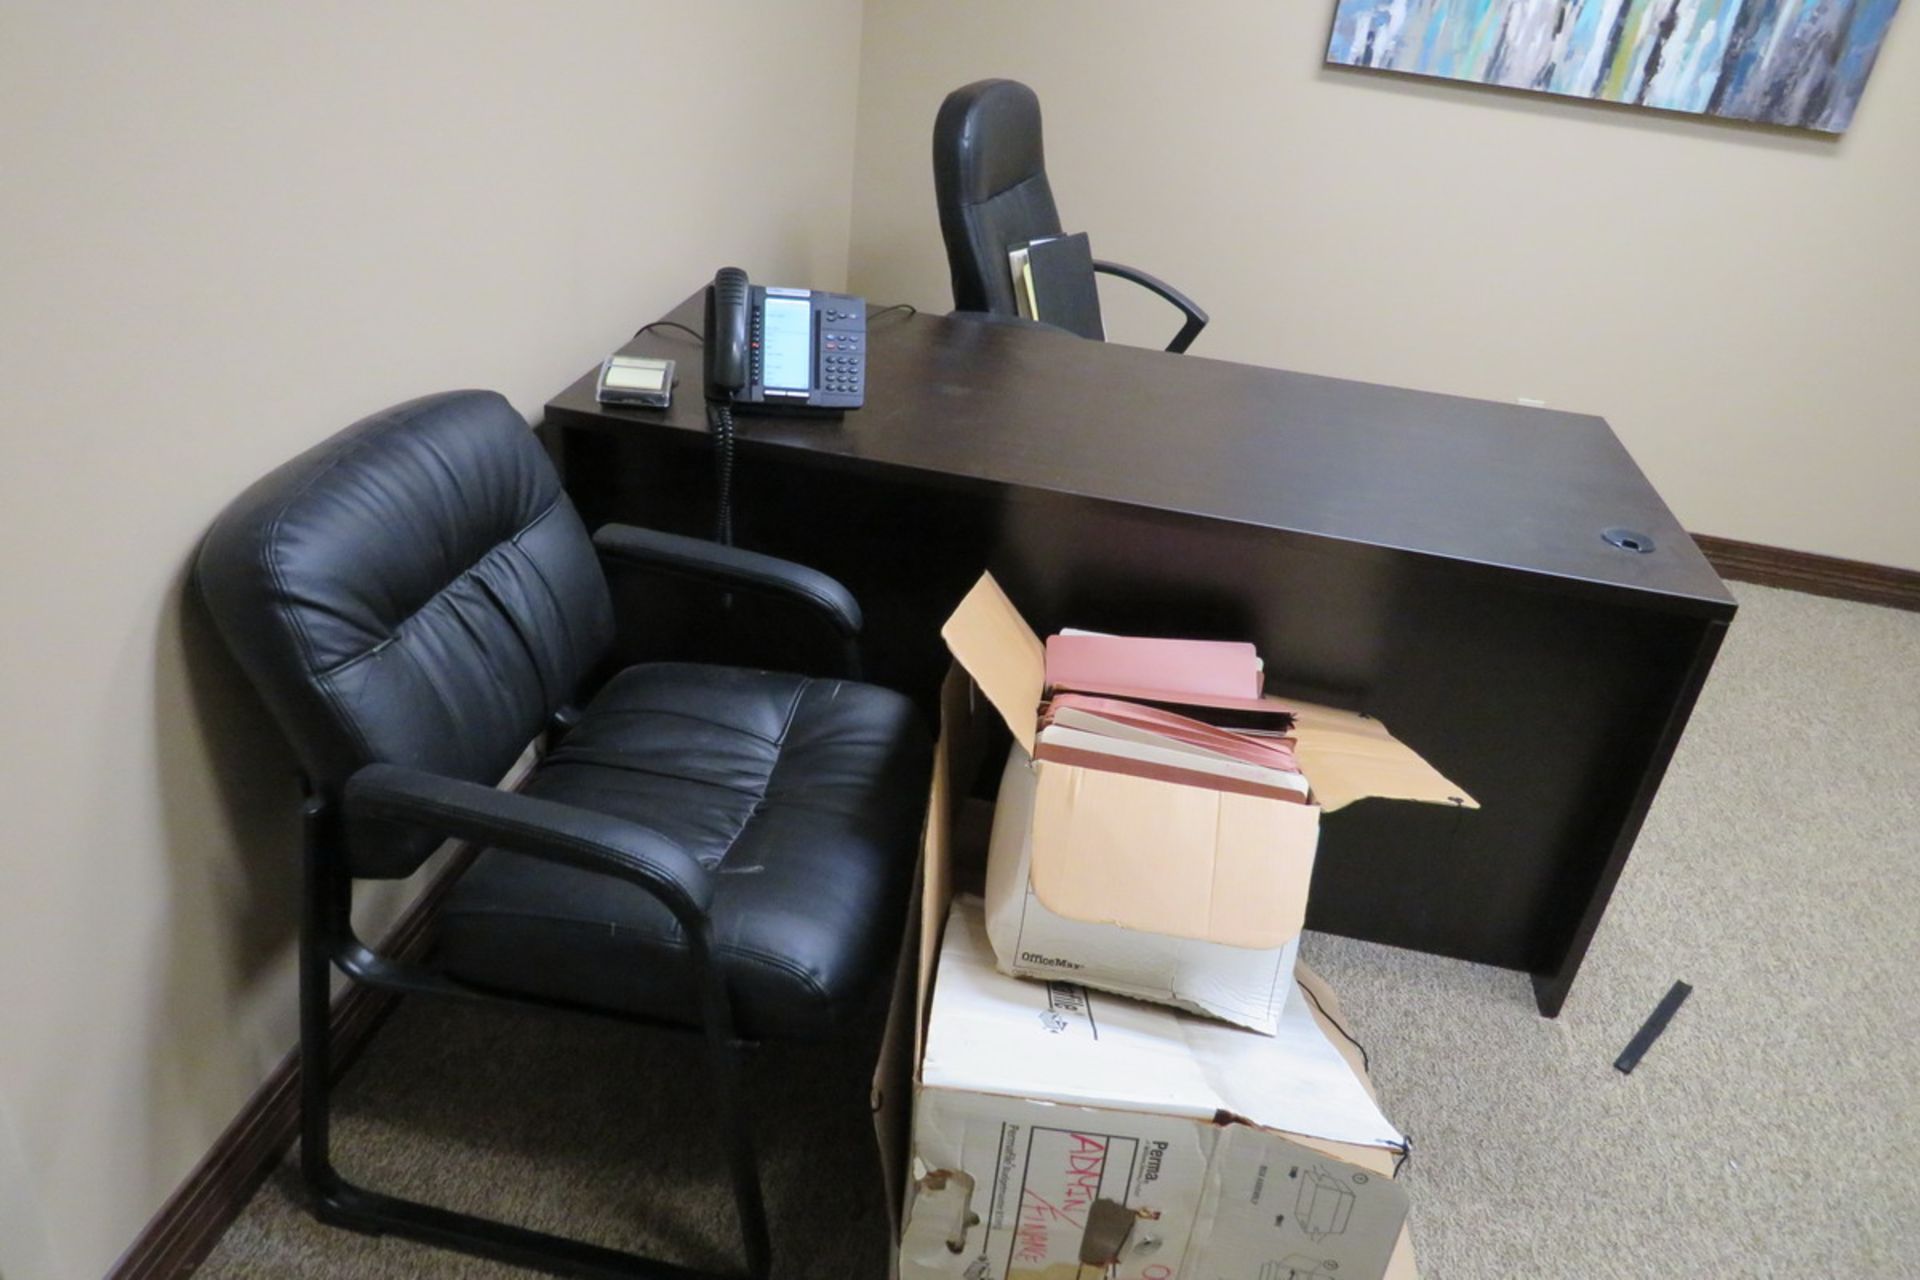 Office Furniture to Include: (2) Desks, (4) Leather Style Chairs